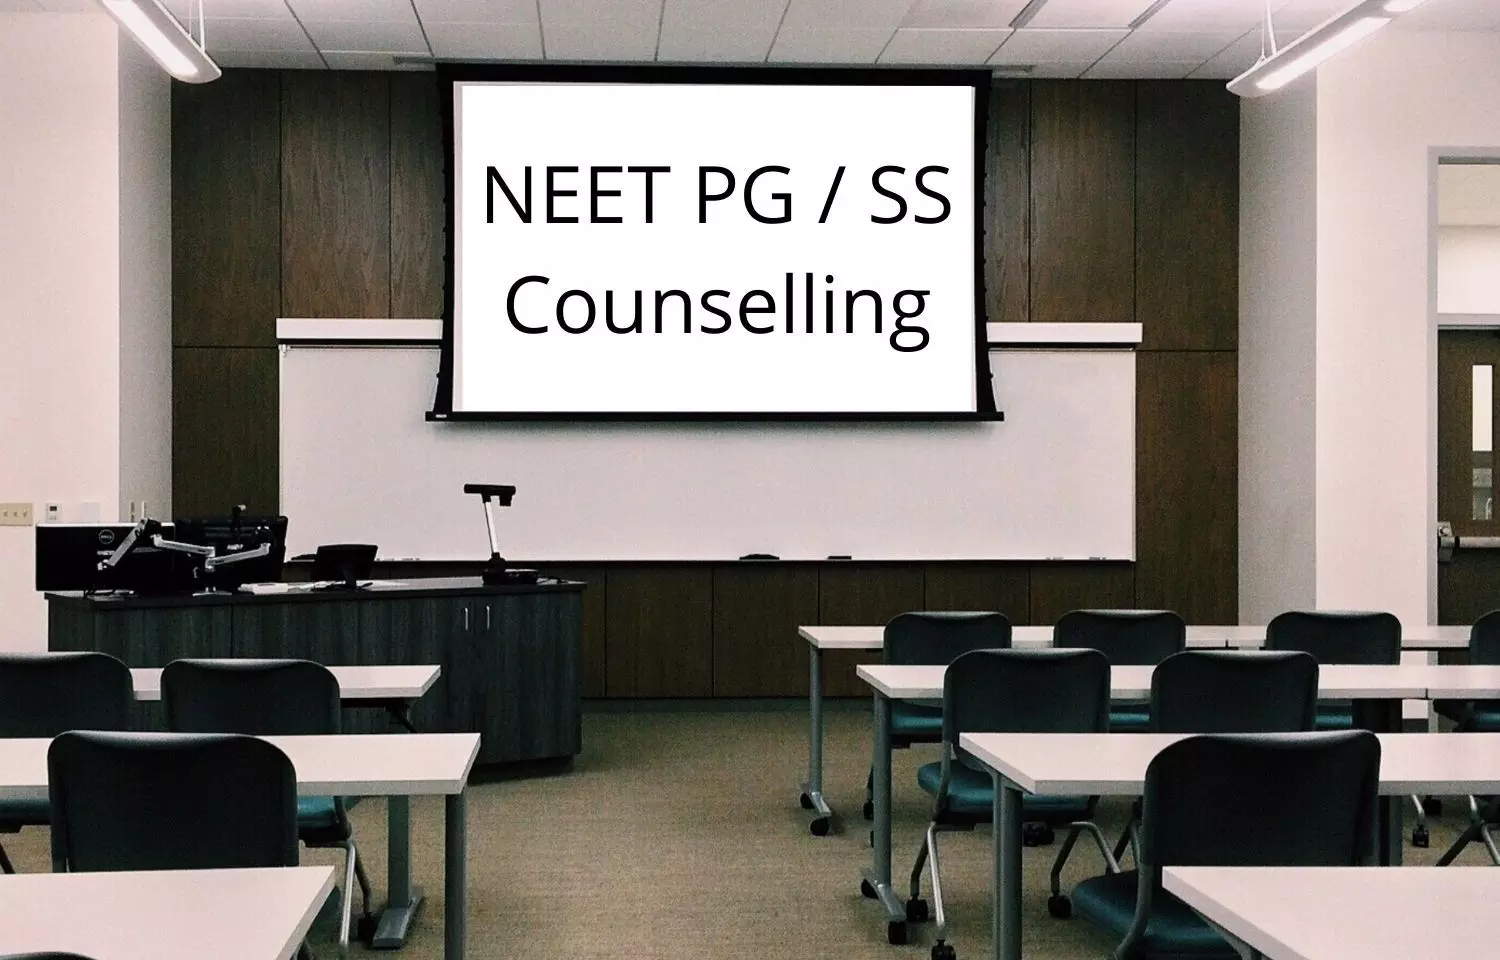 NMC specifies Last Date for NEET PG, SS Counselling, directs Medical colleges to submit admissions info